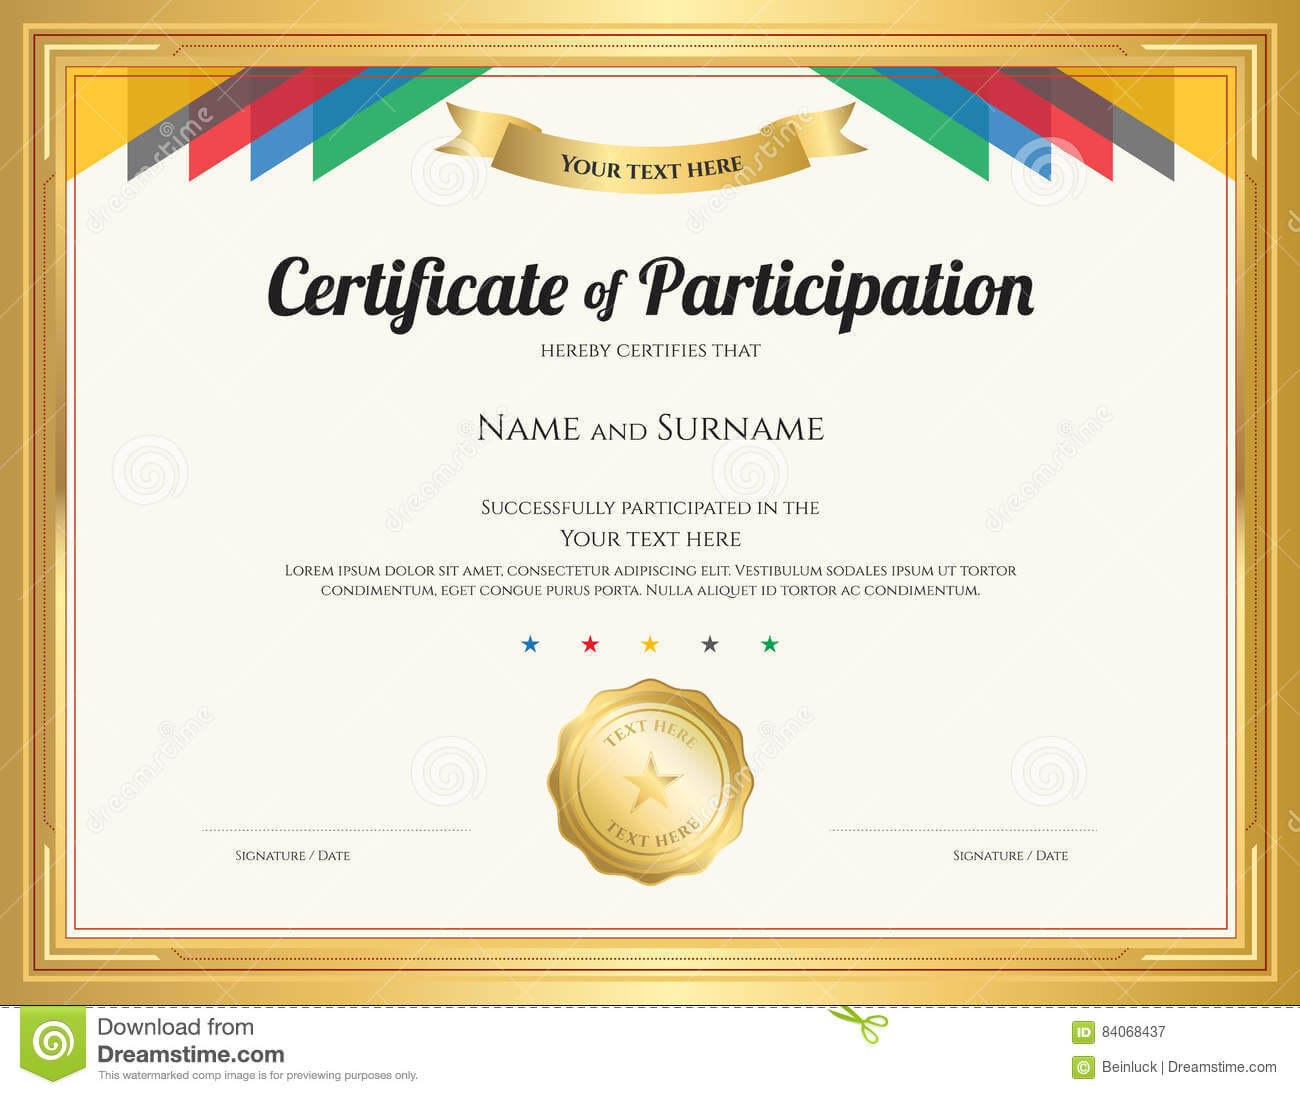 Certificate Of Participation Template With Gold Border Stock For Sample Certificate Of Participation Template